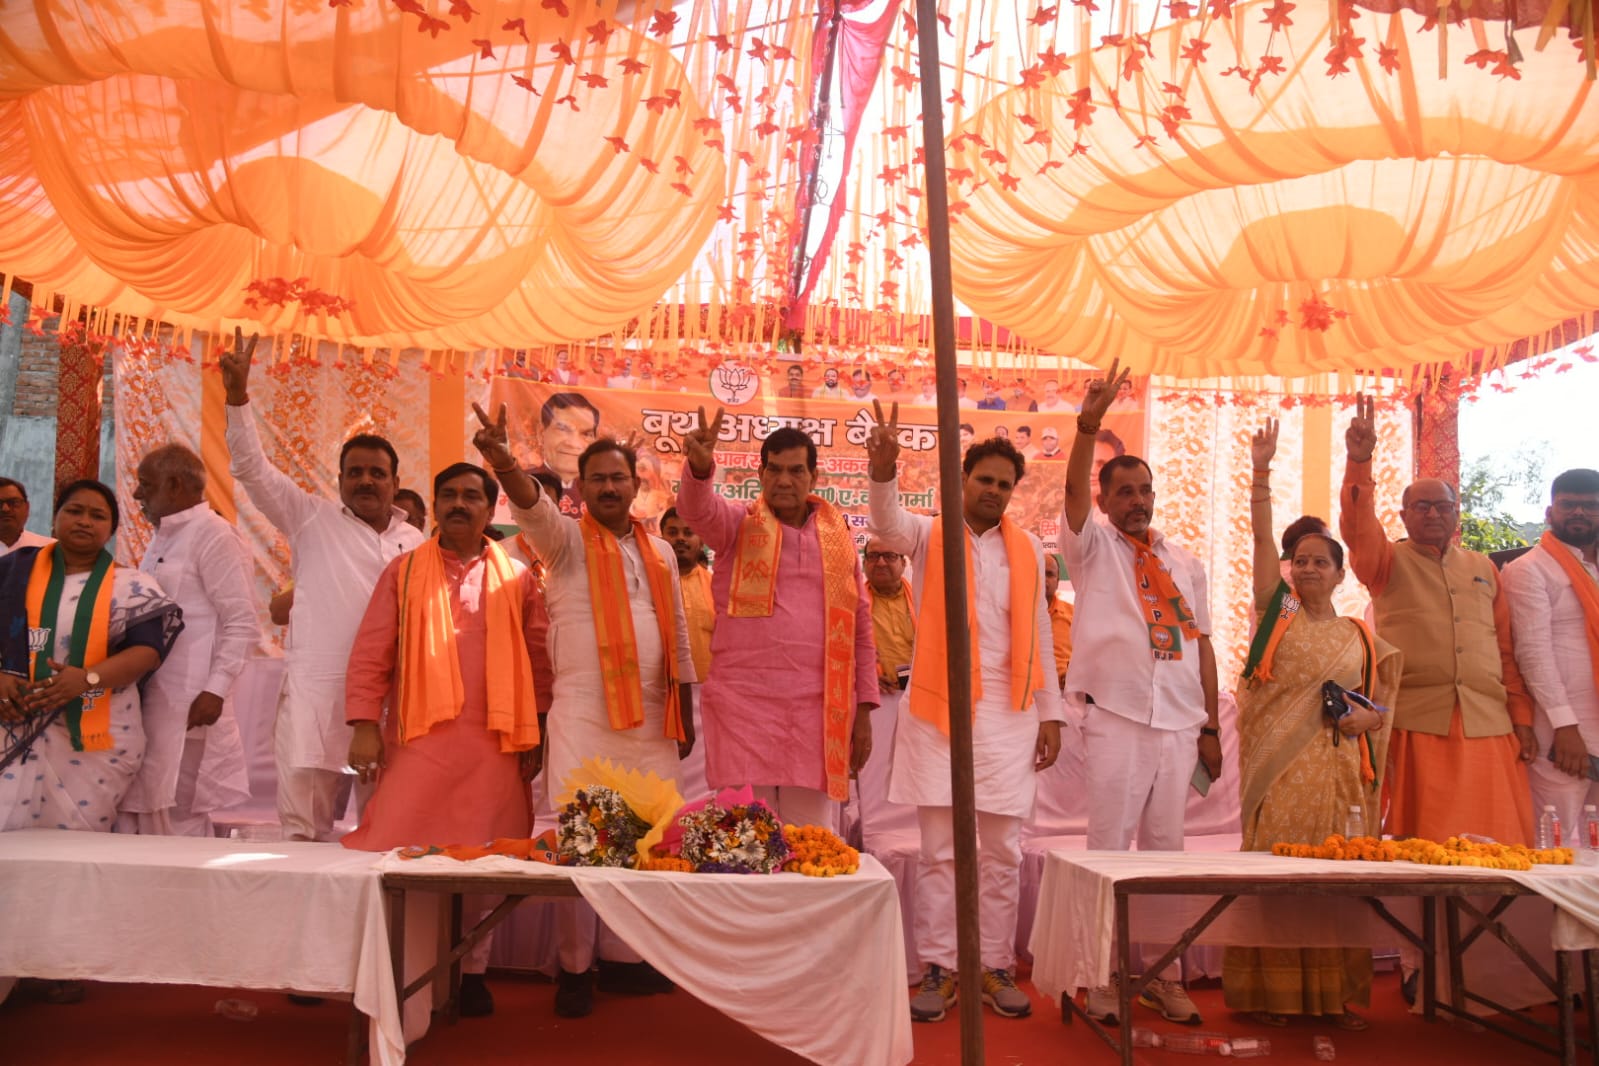 Workers filled with enthusiasm in the conference organized in support of BJP candidate Ritesh Pandey.